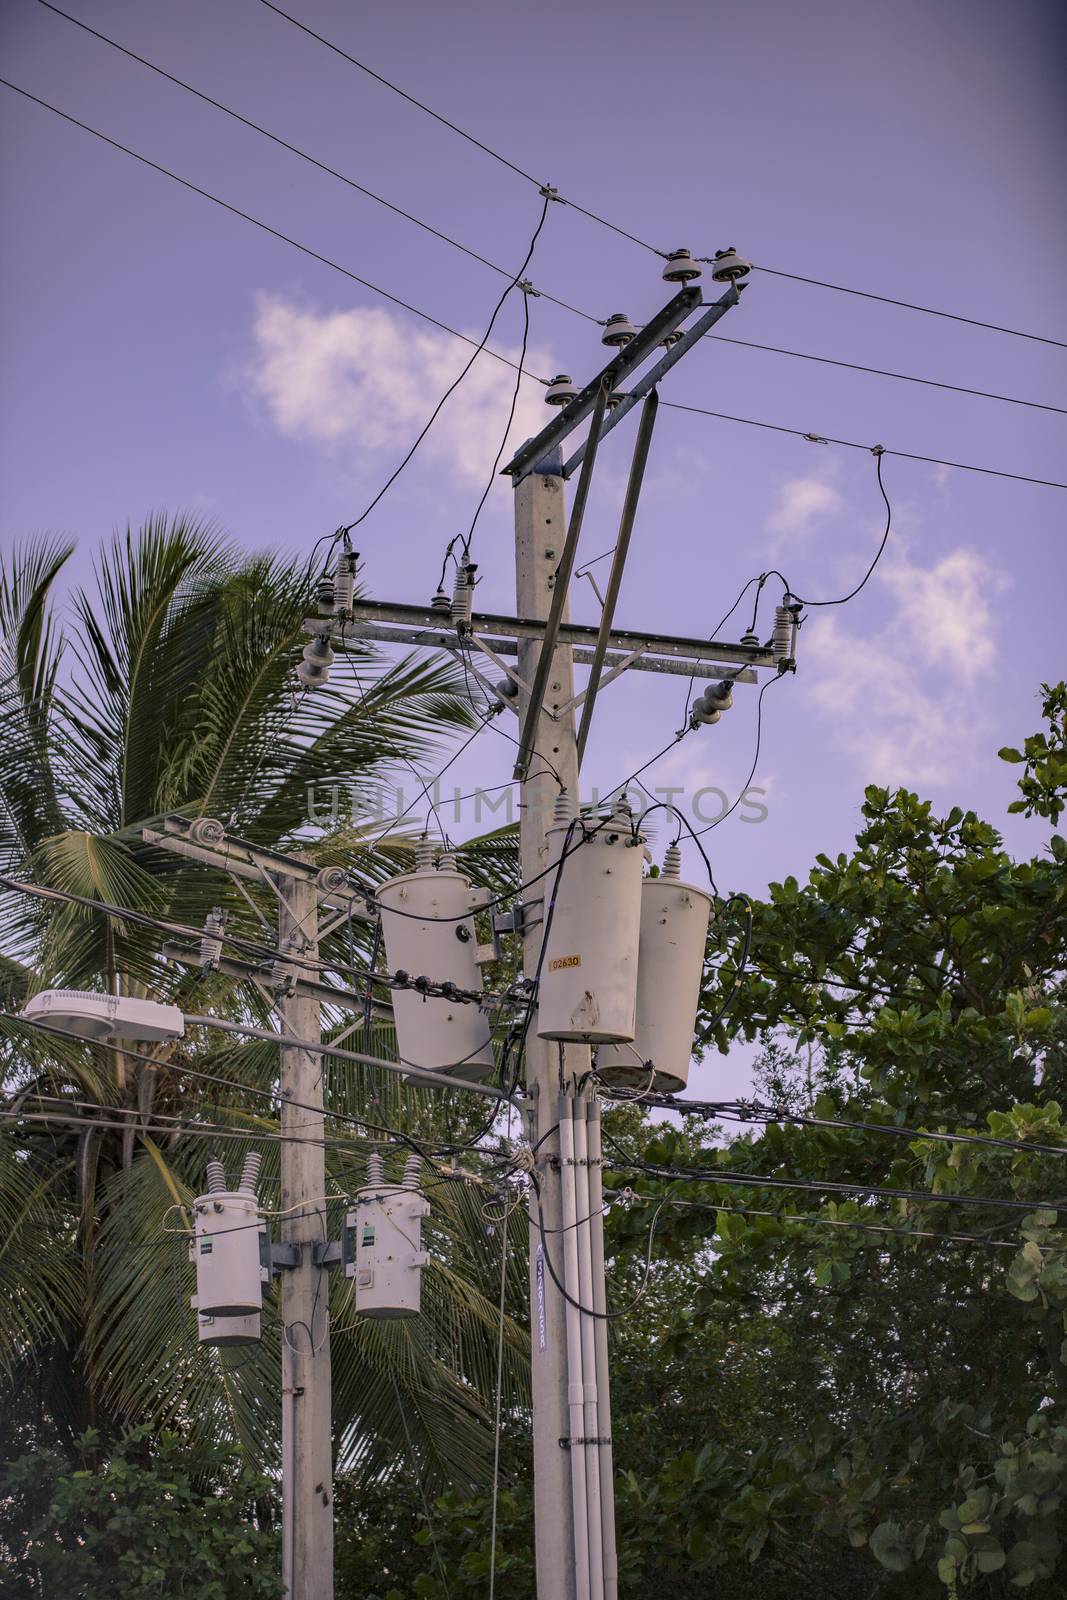 Electrical transformers on poles by pippocarlot